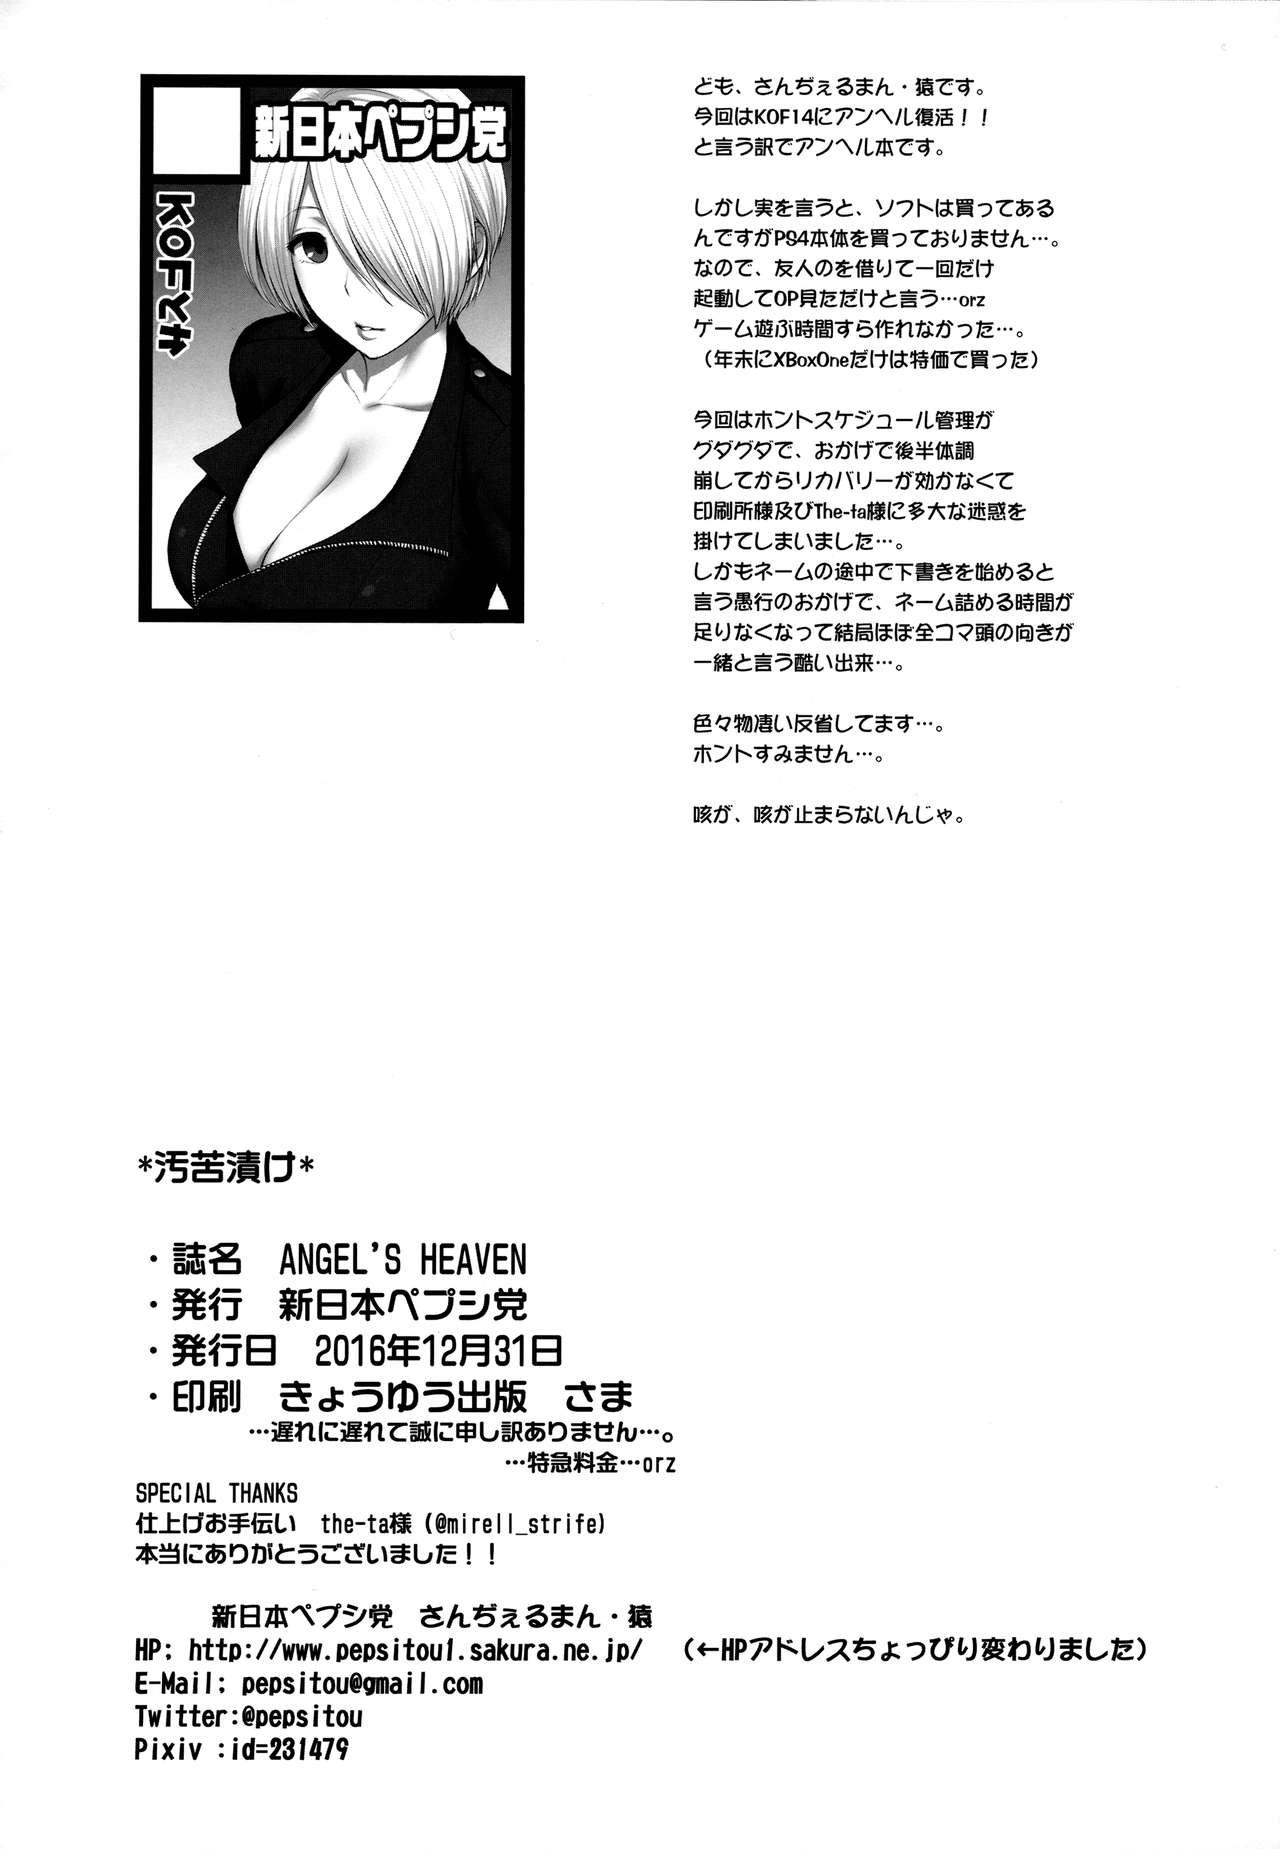 Blows ANGEL'S HEAVEN - King of fighters Dress - Page 21